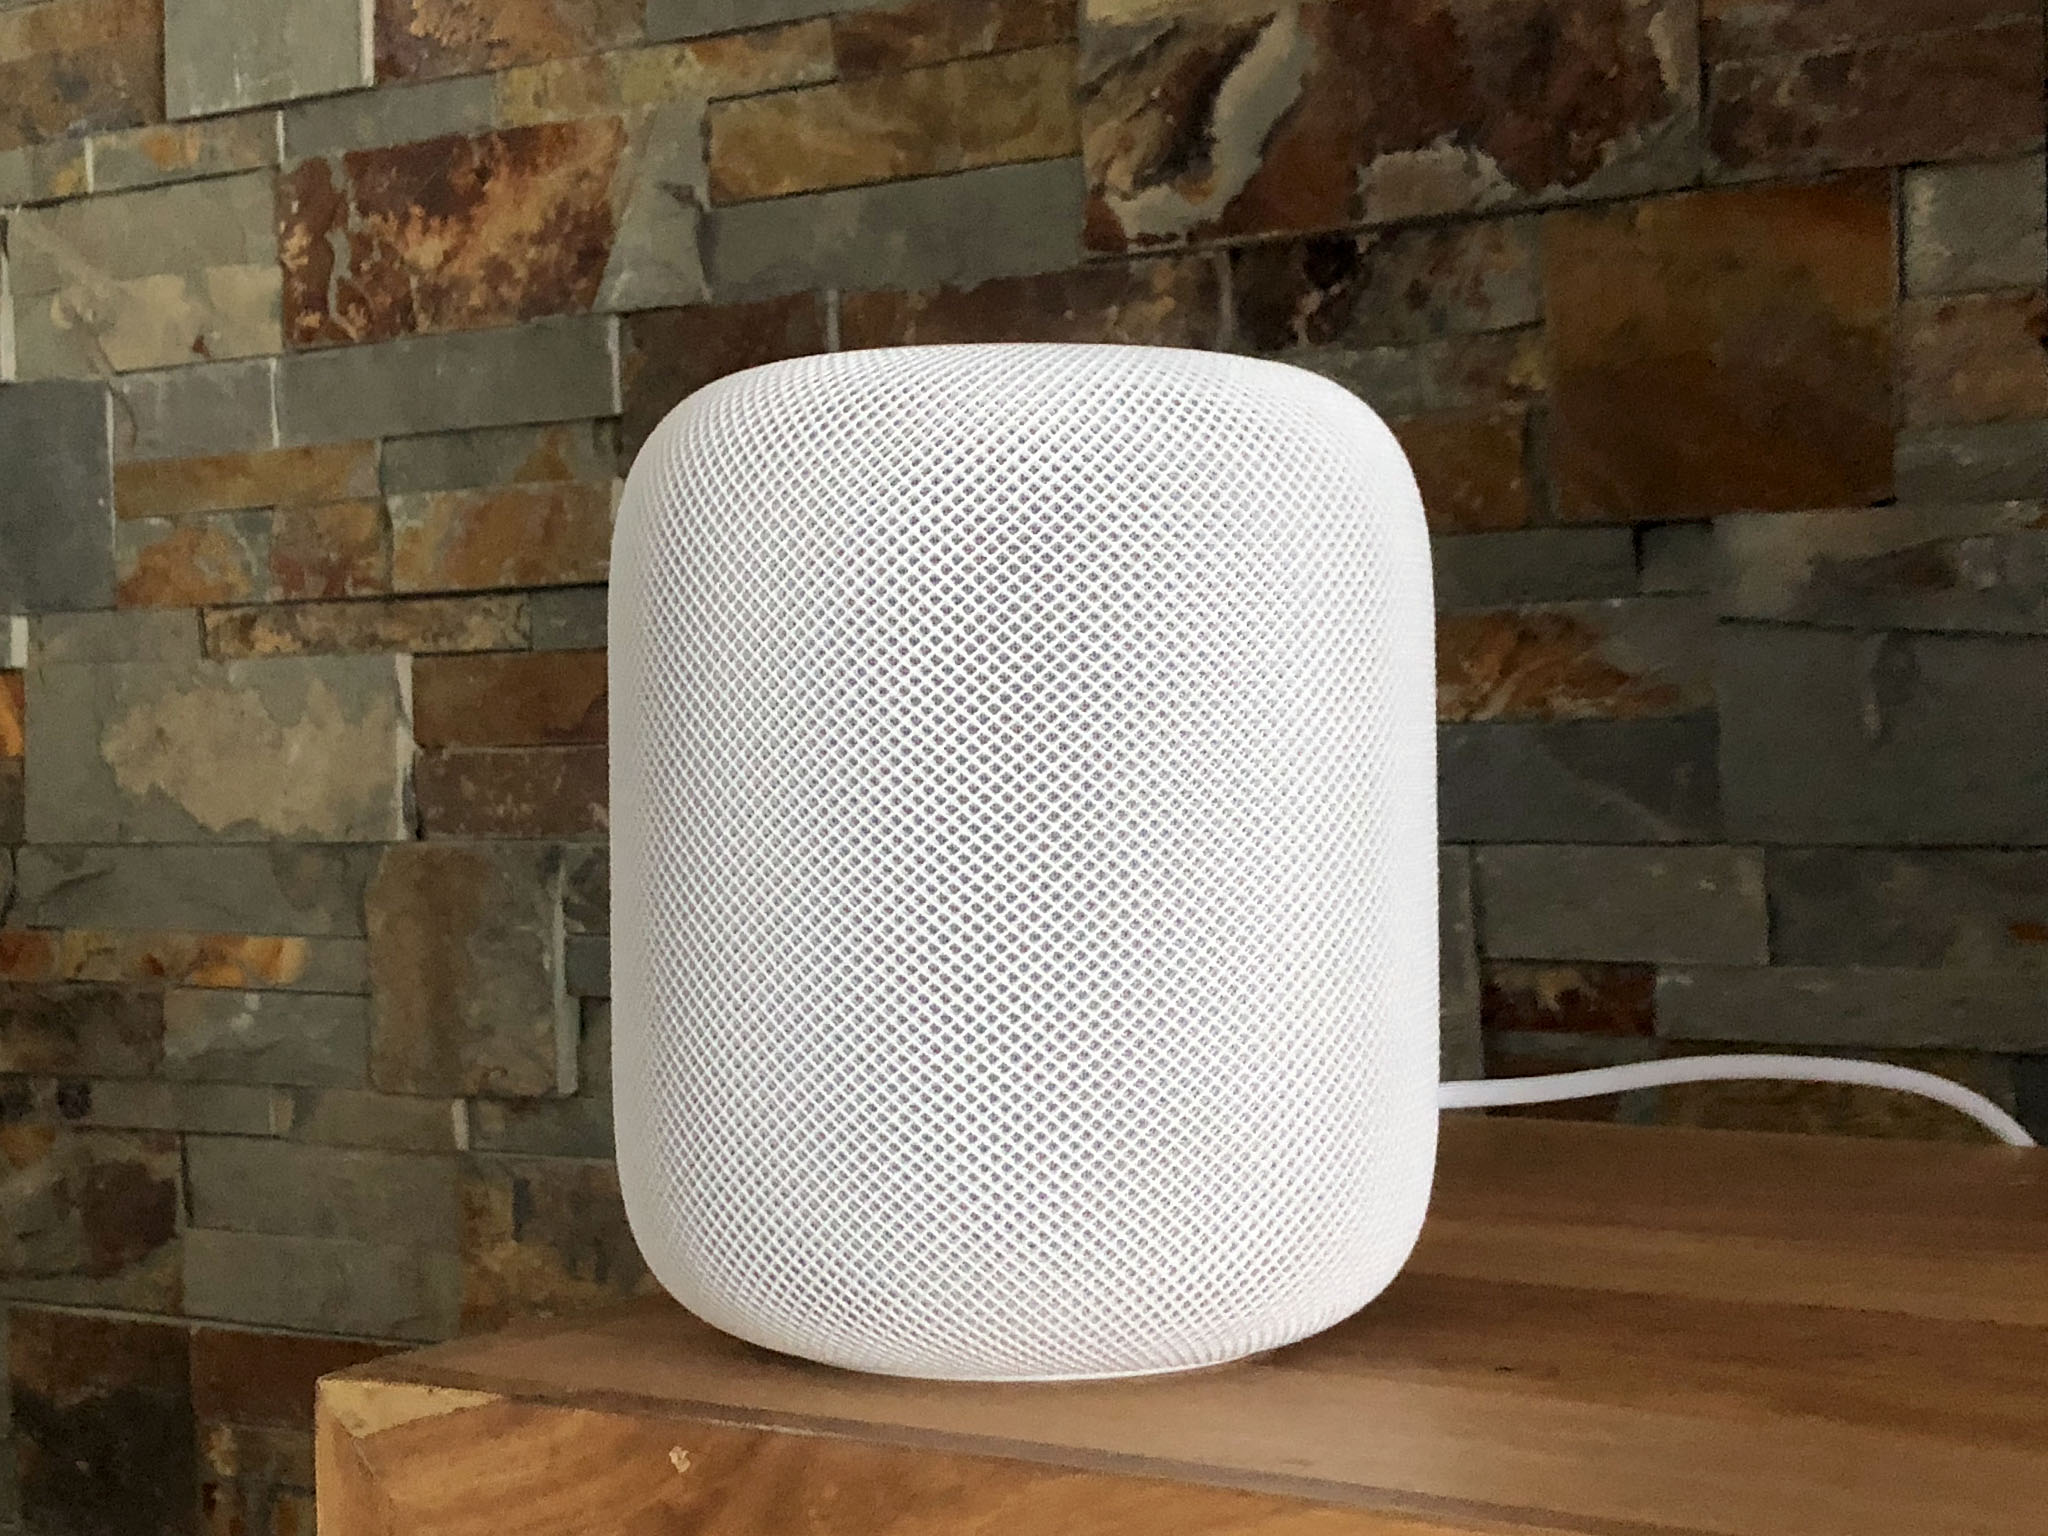 How to install software updates for your HomePod